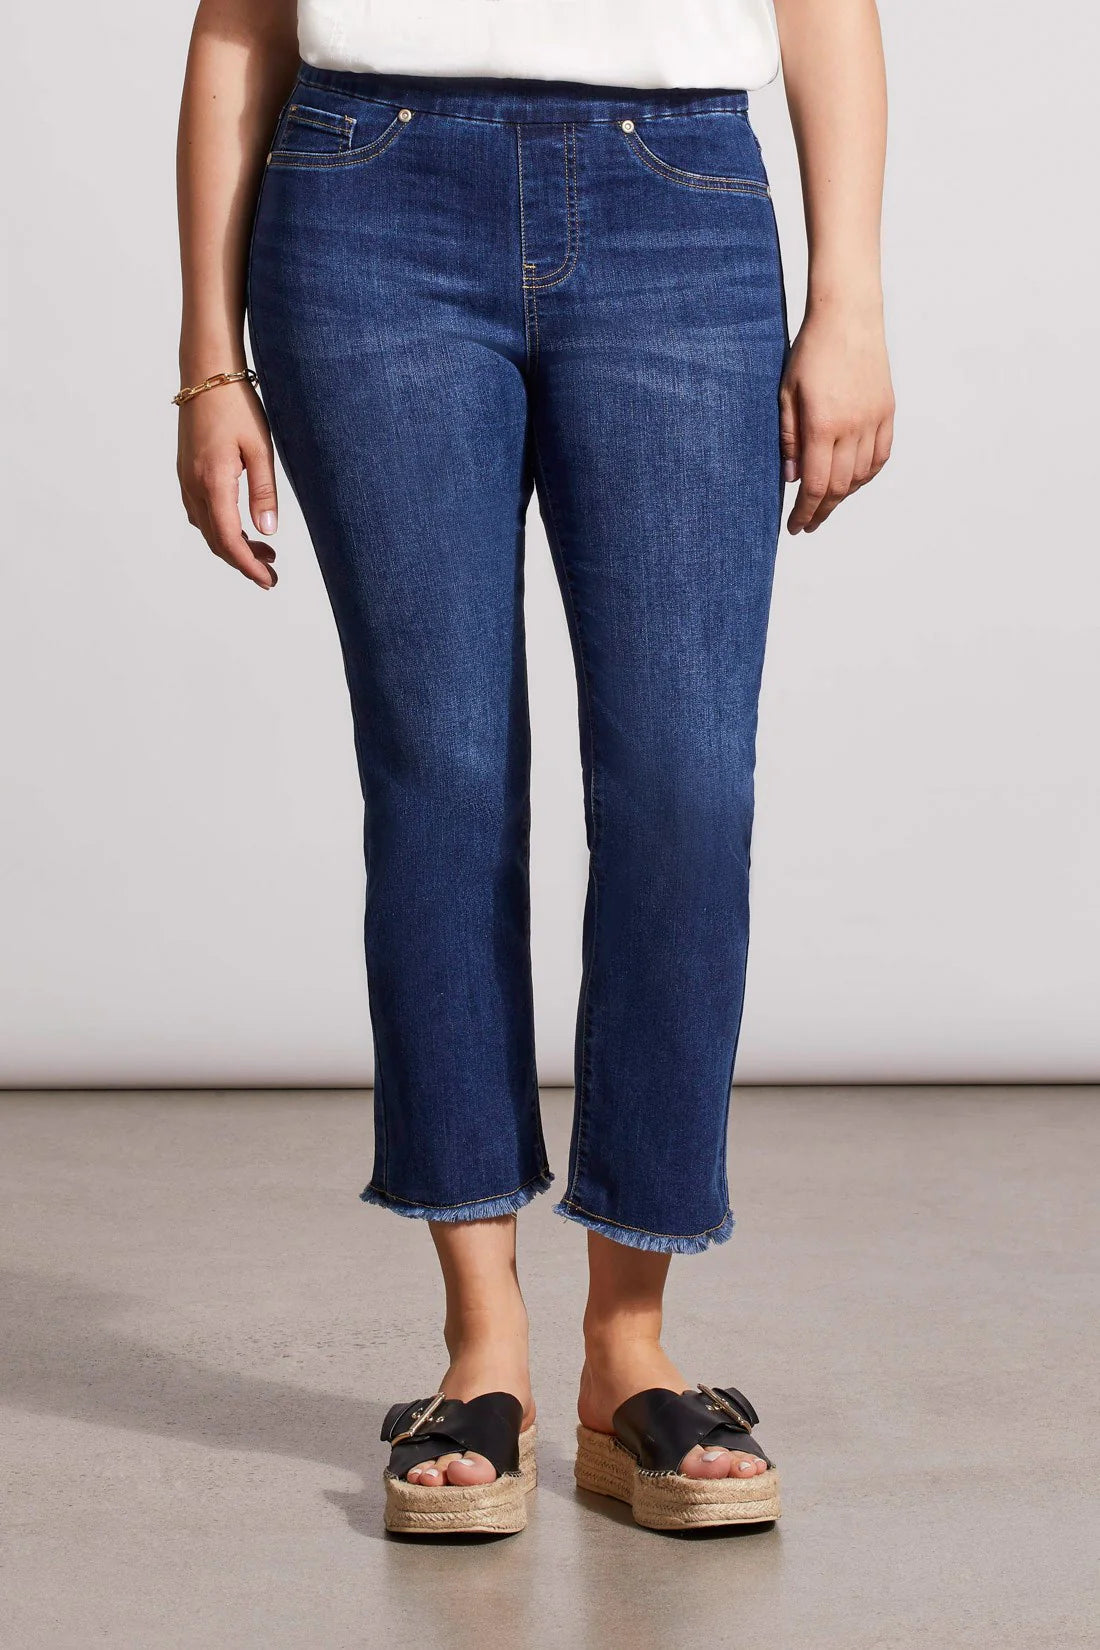 The thoughtfully designed jean is slim-fitting through the hip, butt and thigh with a straight leg.